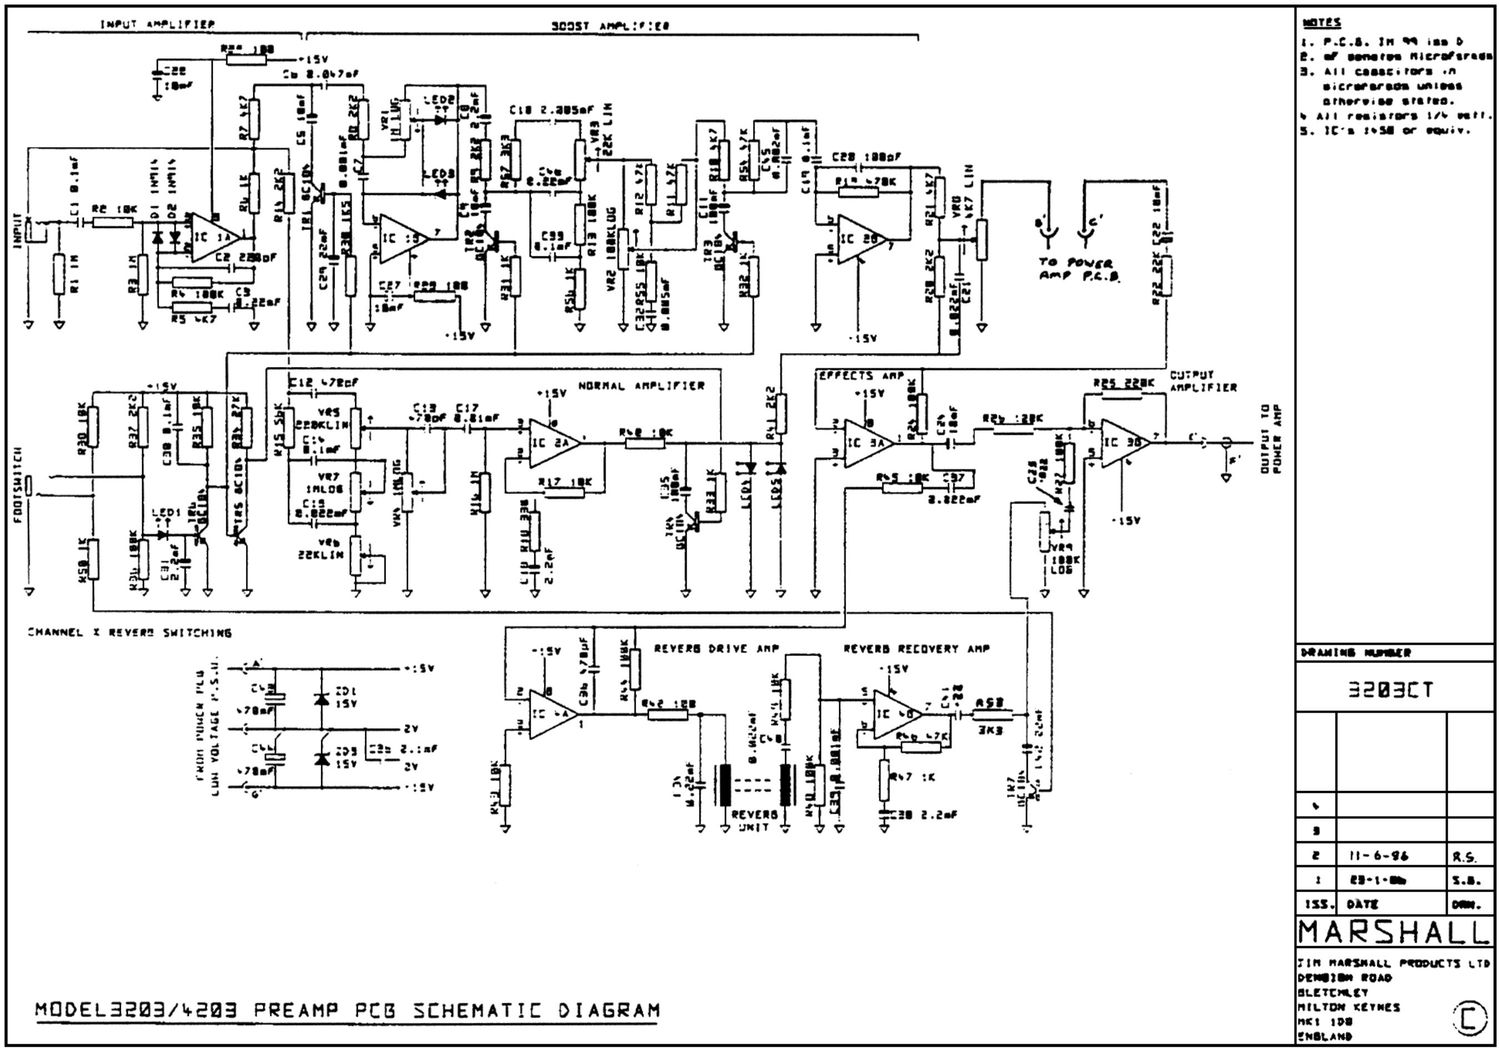 Marshall 4203 Preamp Schematic